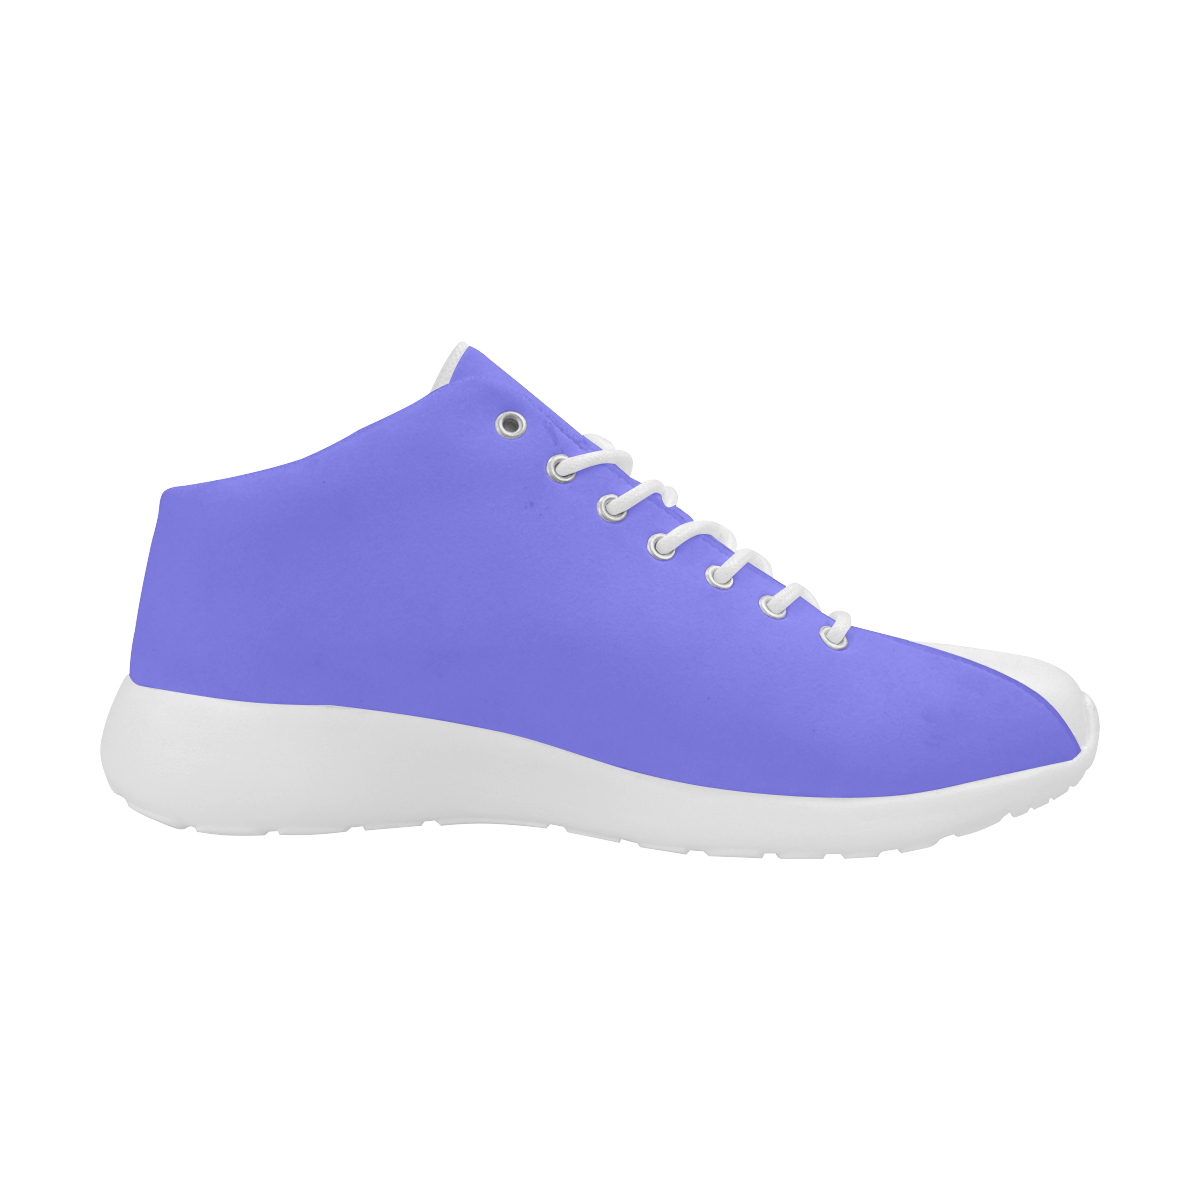 Periwinkle Perkiness Men's Basketball Training Shoes (Model 47502)